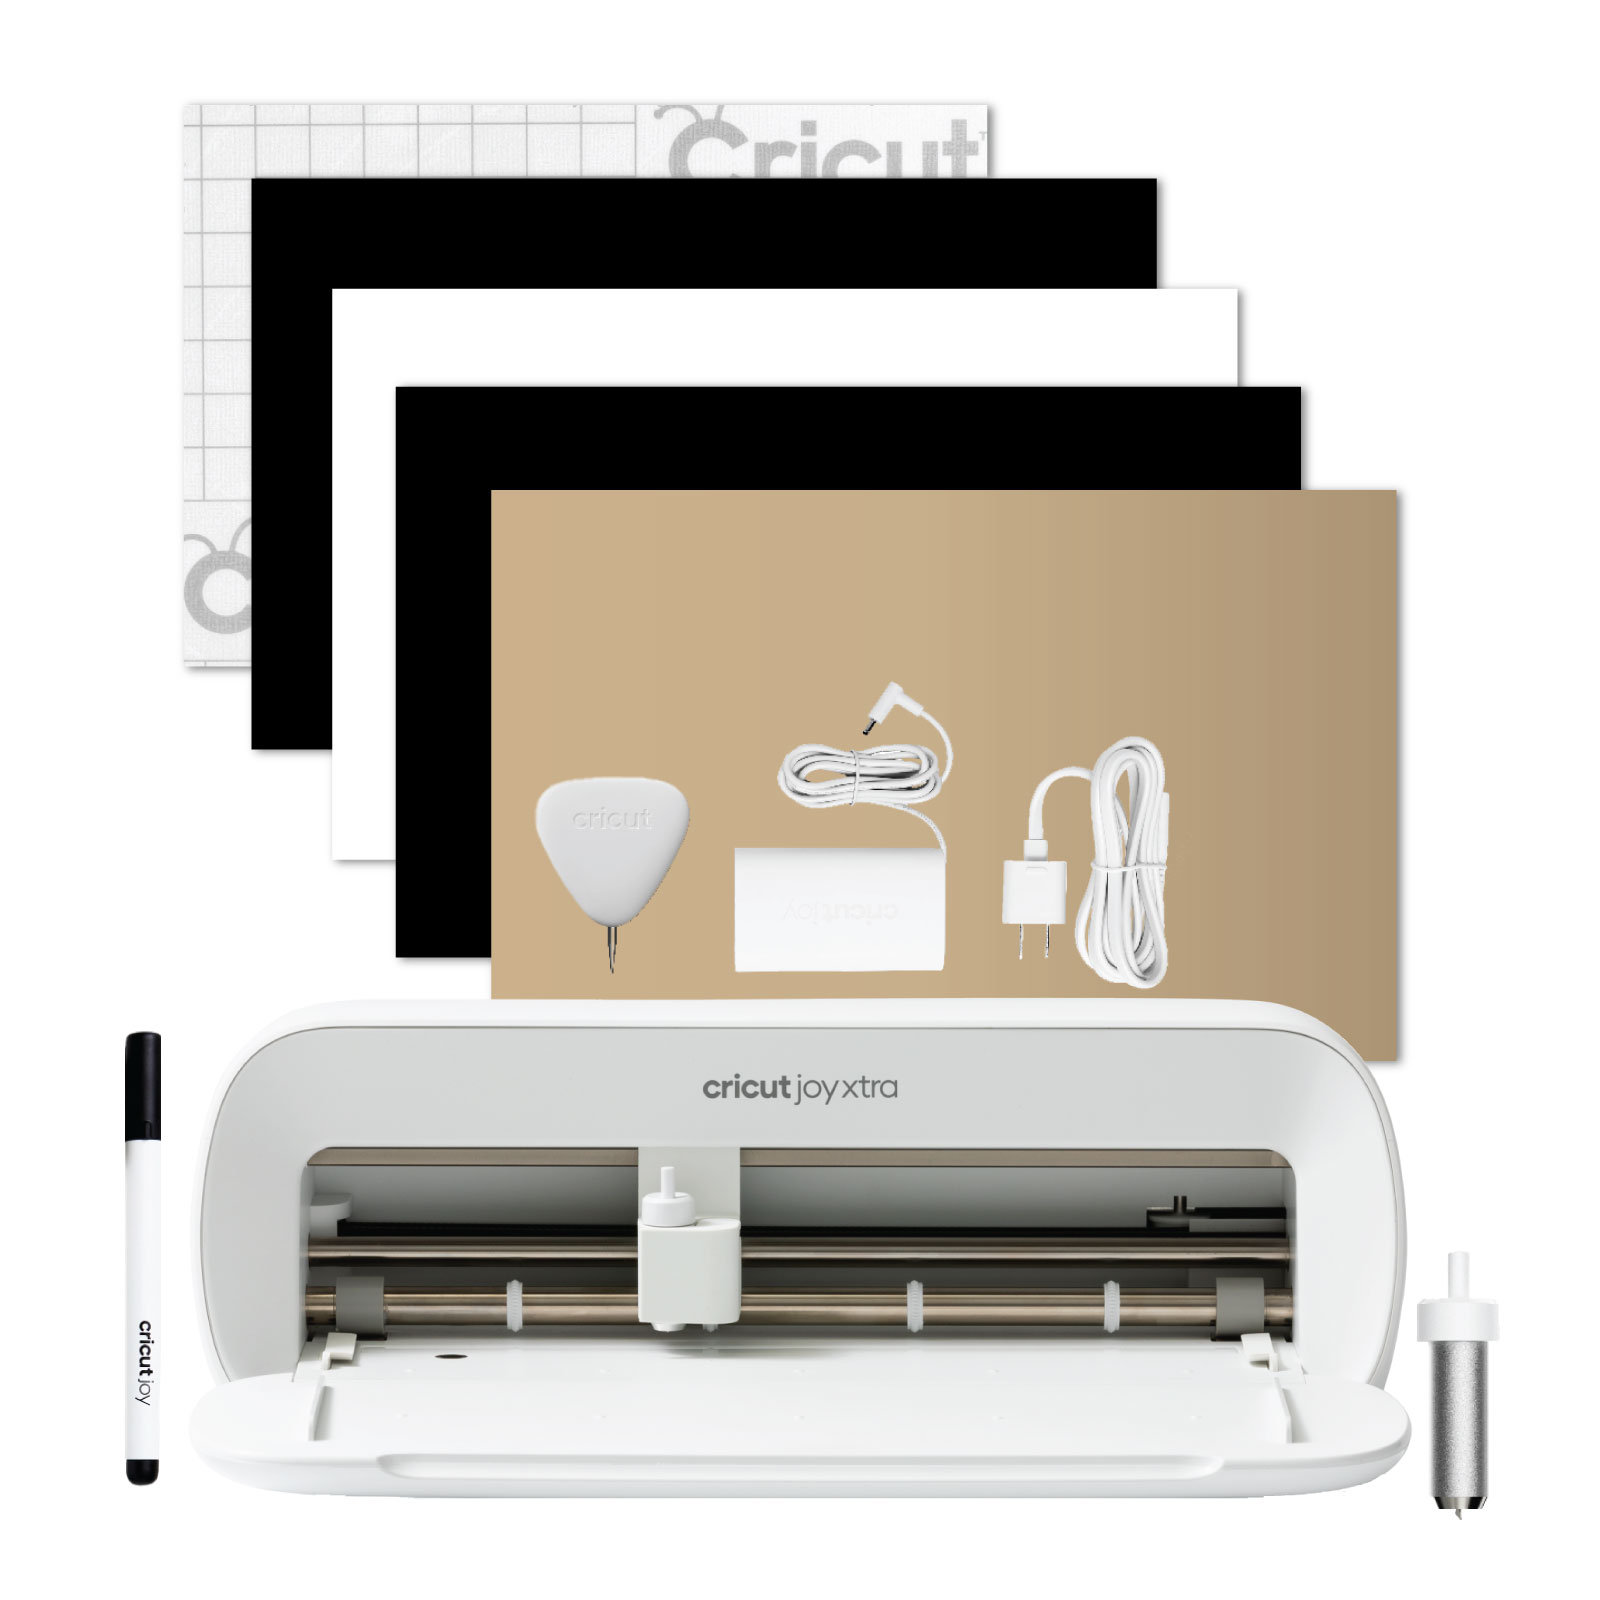 Cricut Joy Xtra Review: Make Stickers, Cards, And T-shirts